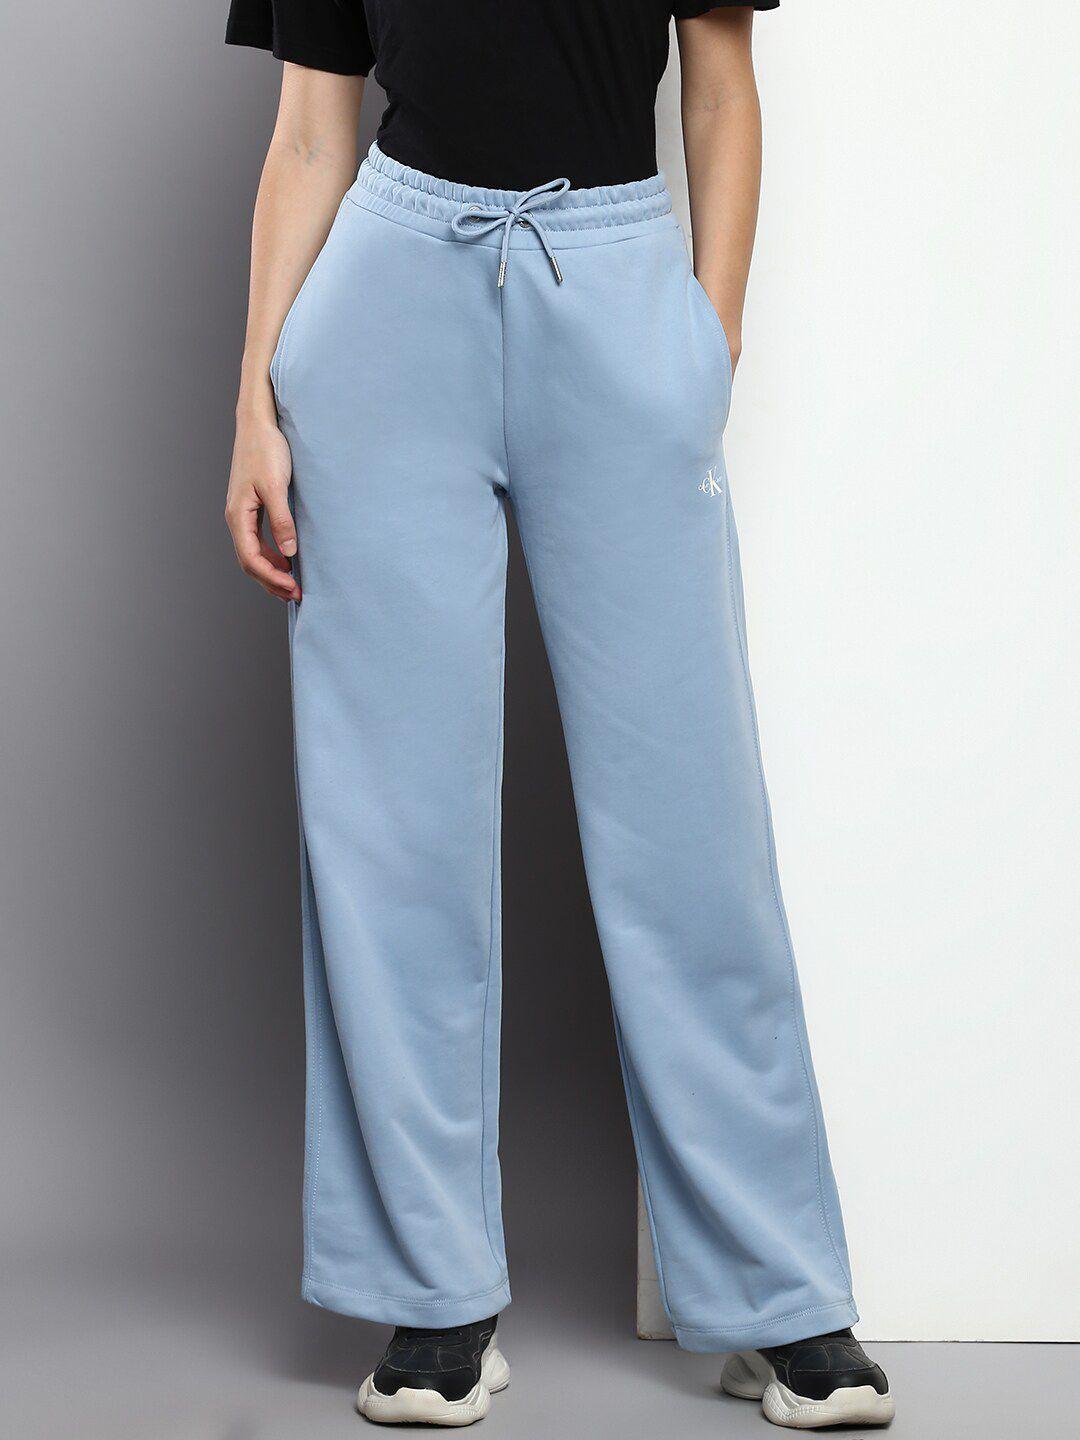 calvin-klein-jeans-women-organic-cotton-relaxed-fit-track-pants